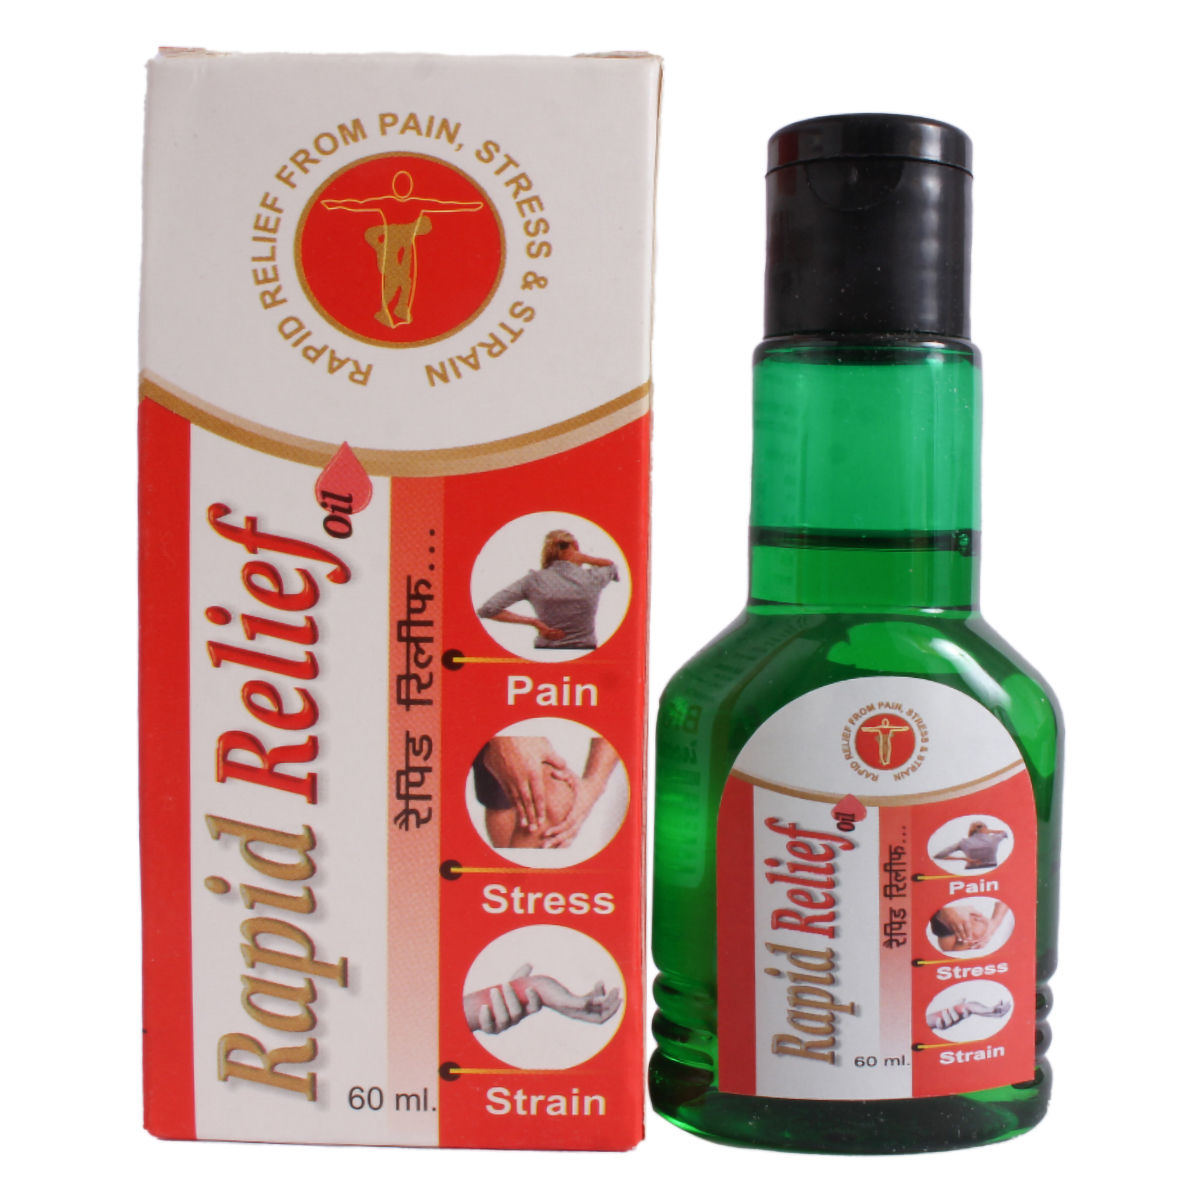 Rapid Relief Oil: Buy bottle of 60.0 ml Oil at best price in India